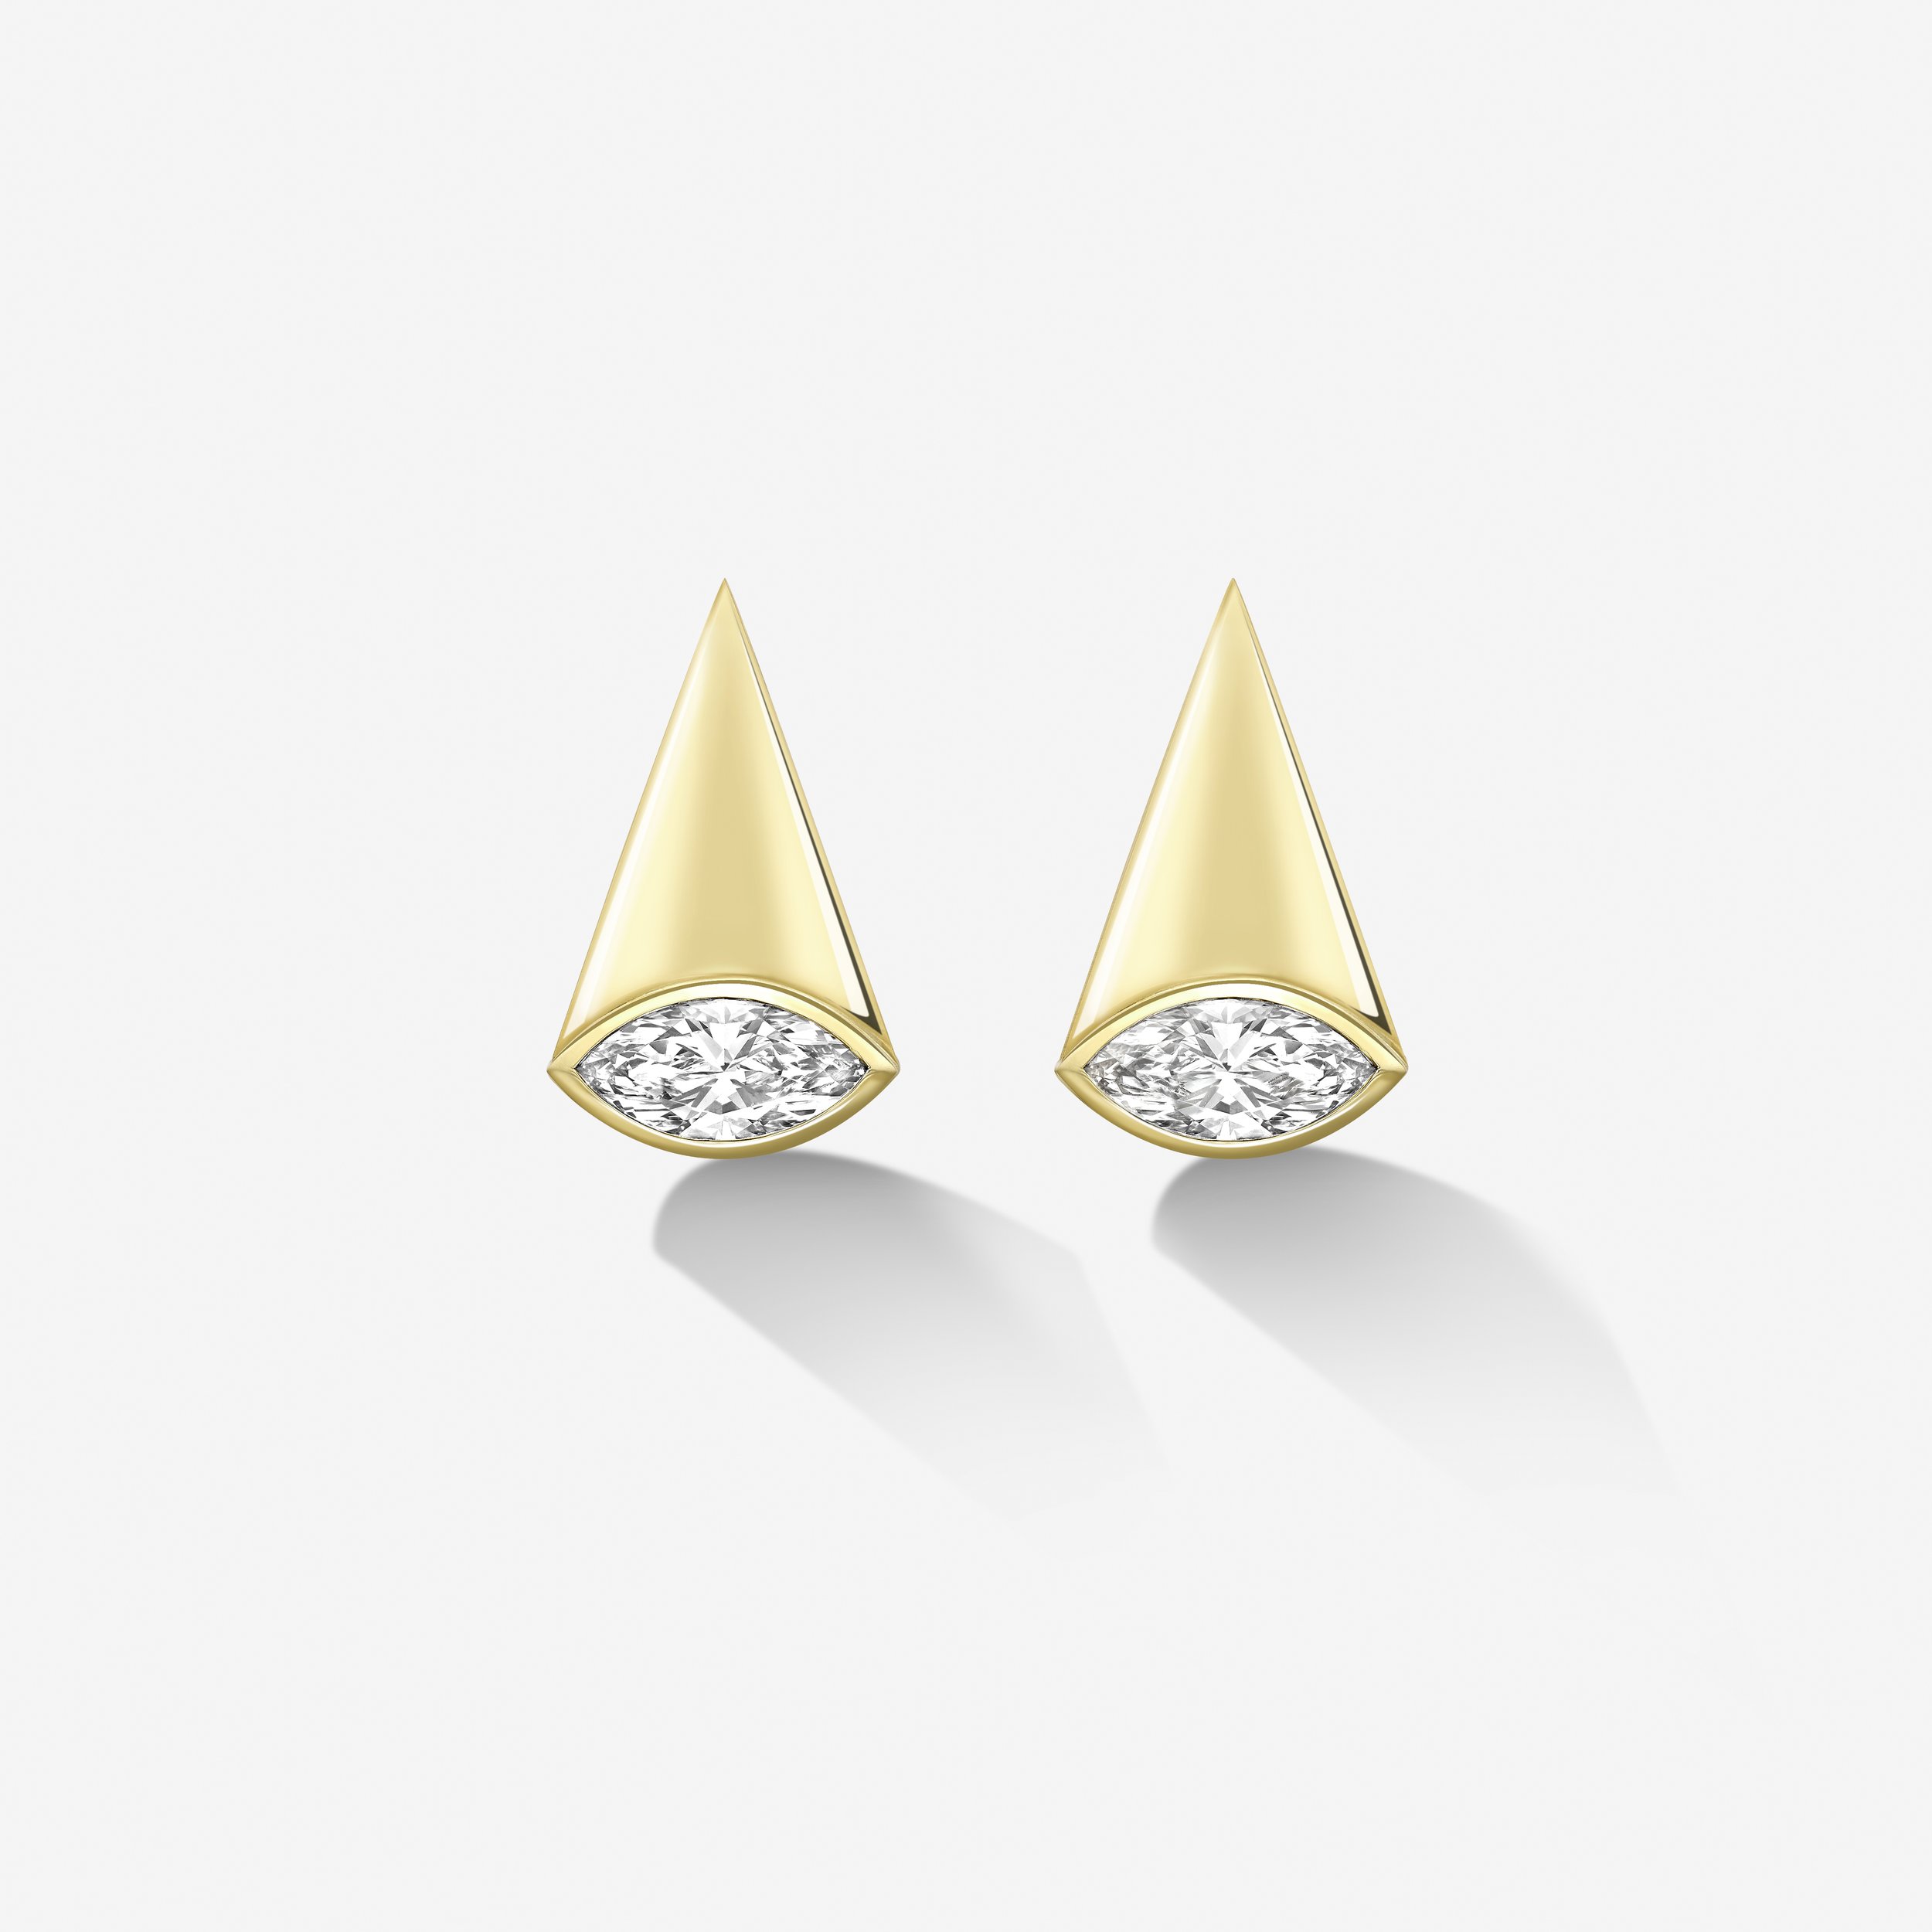 CIELE EARRINGS - Yellow gold with east west set marquise diamonds — Liv ...